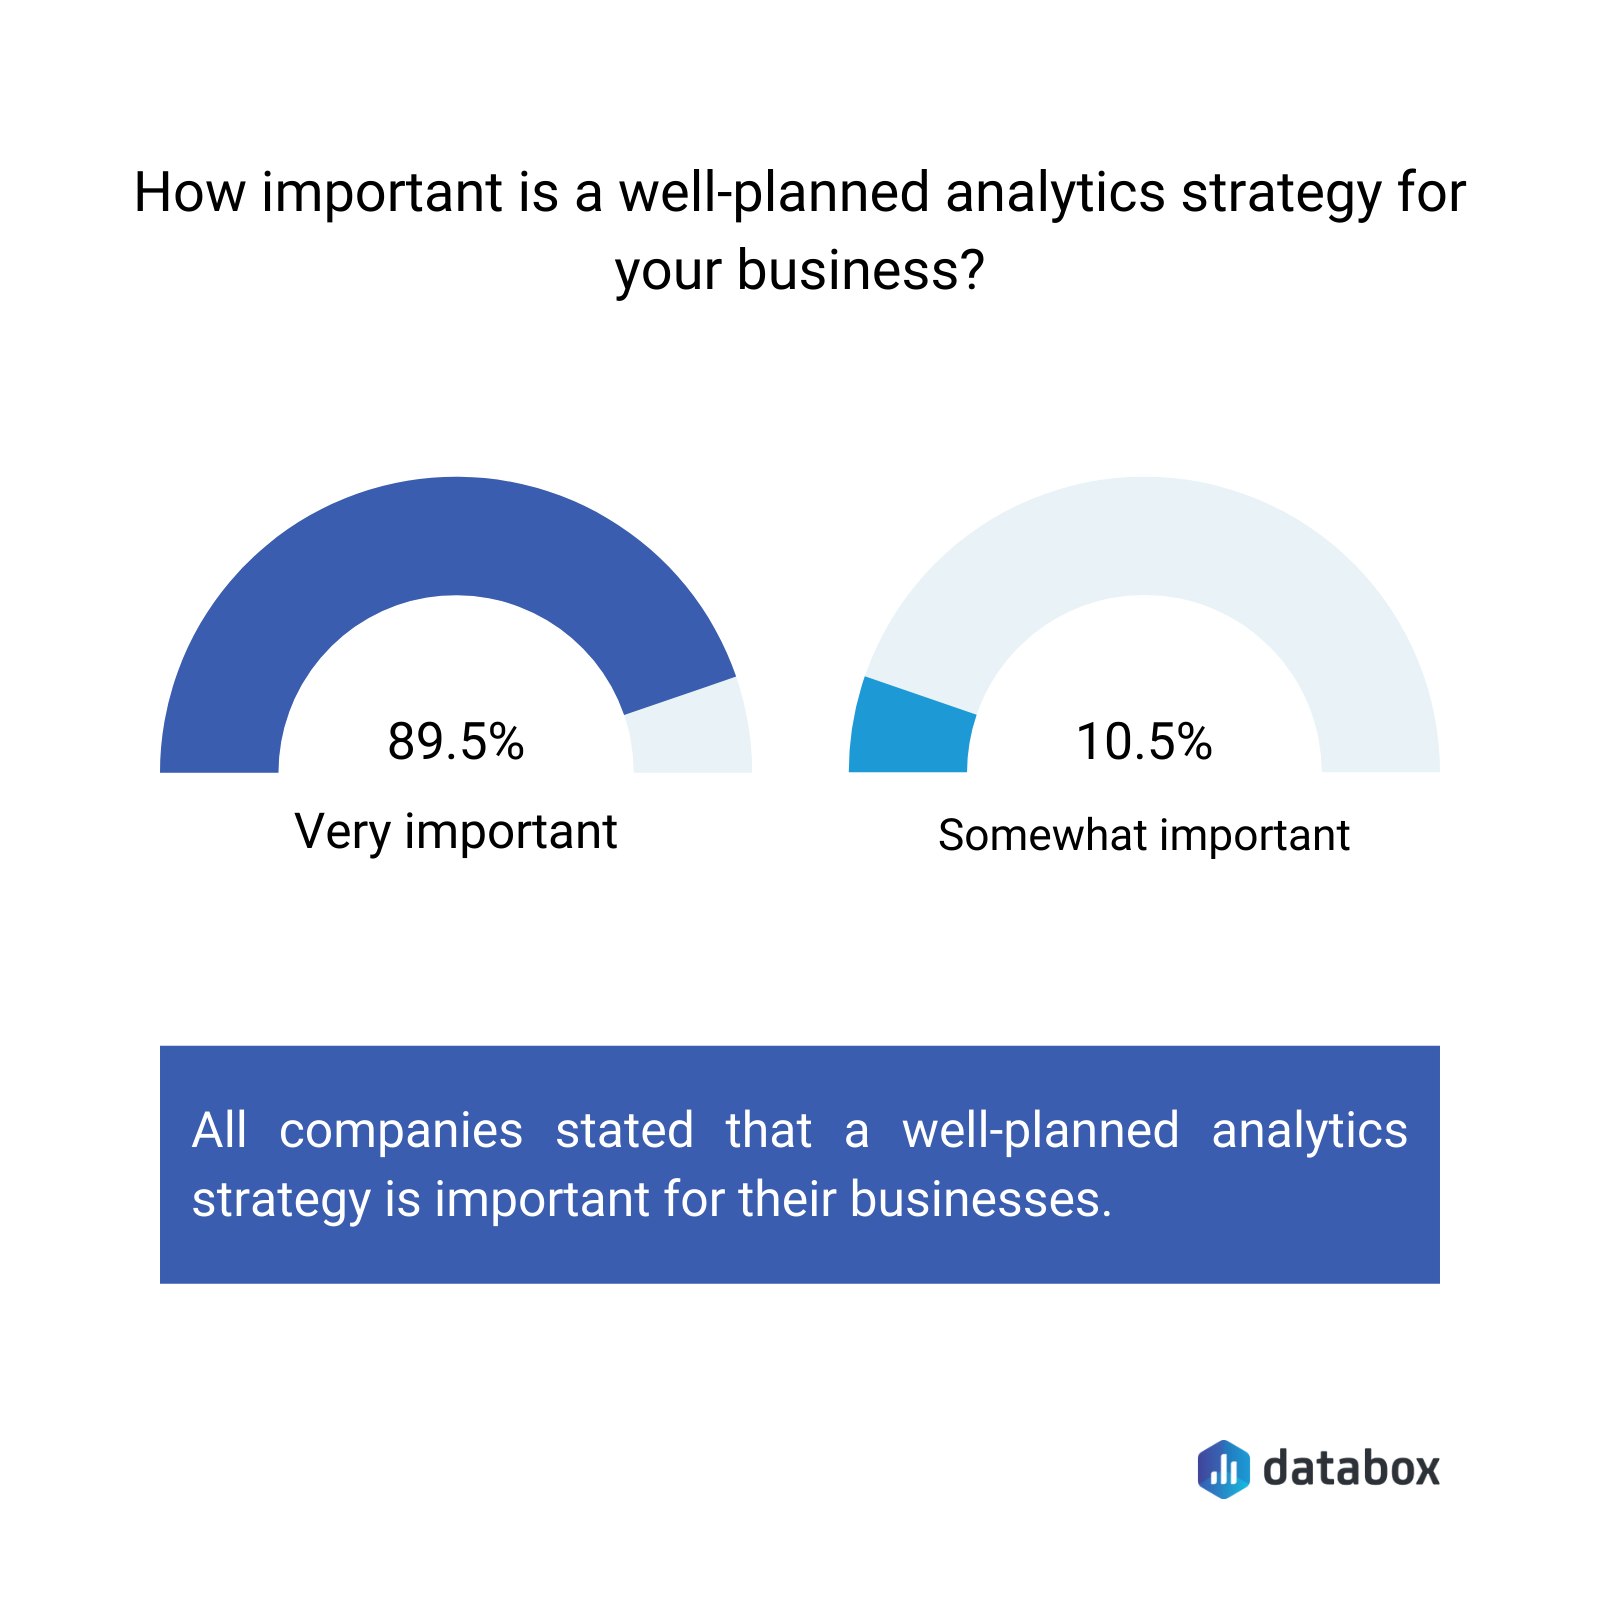 how important is a well-planned analytics strategy for your business